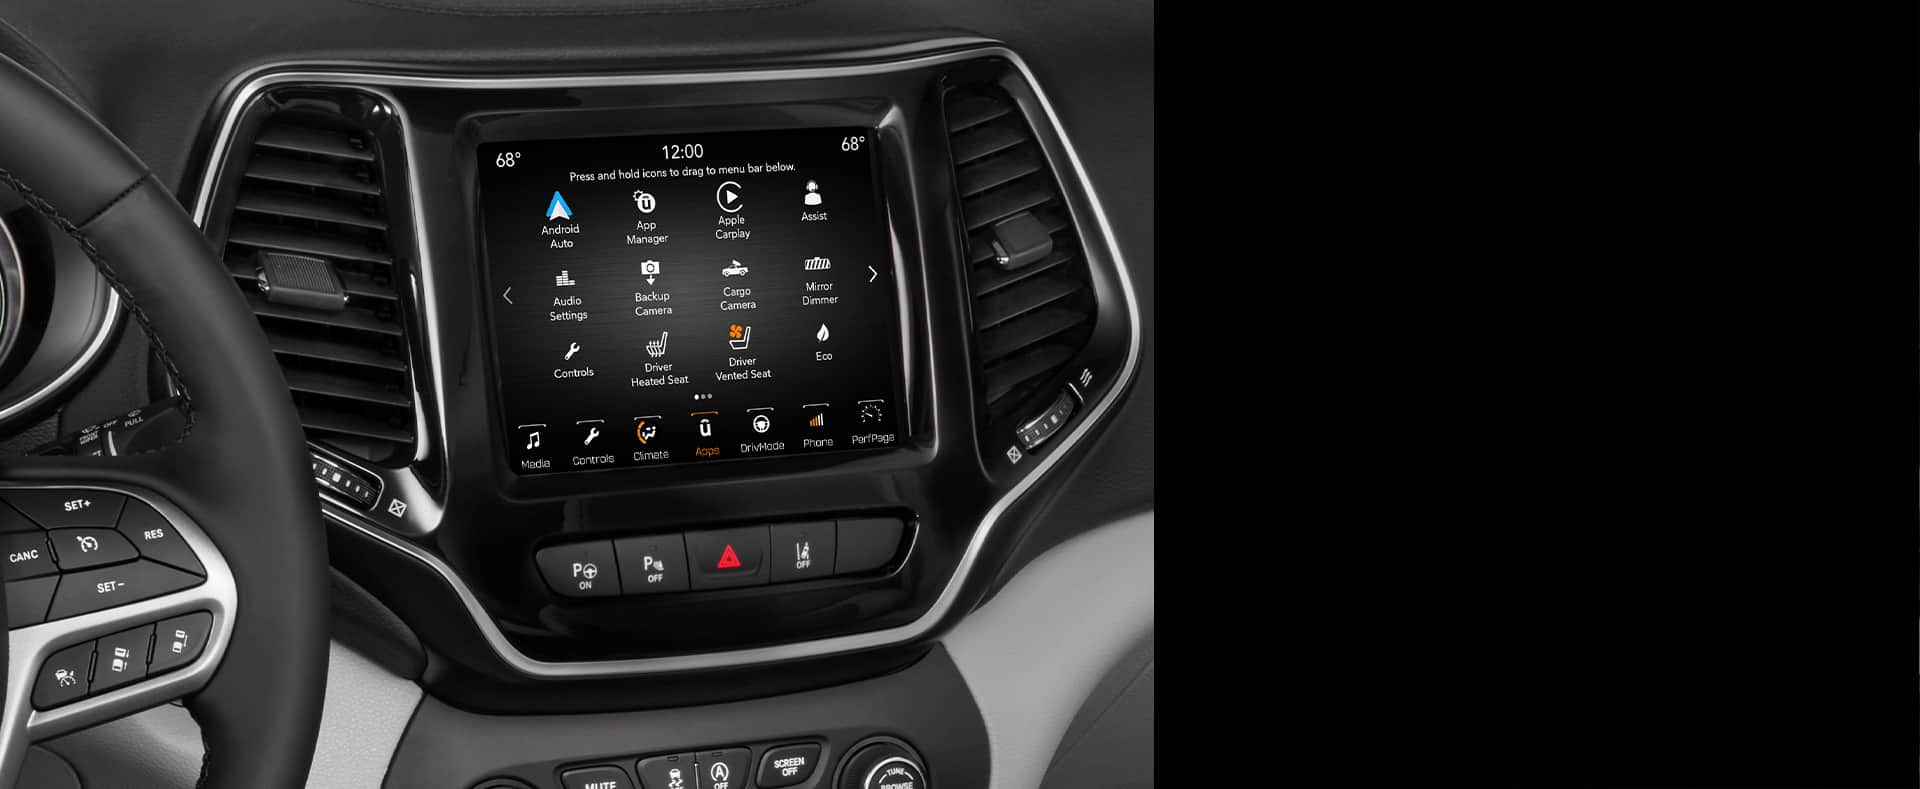 Close-up of touchscreen in Jeep Cherokee.